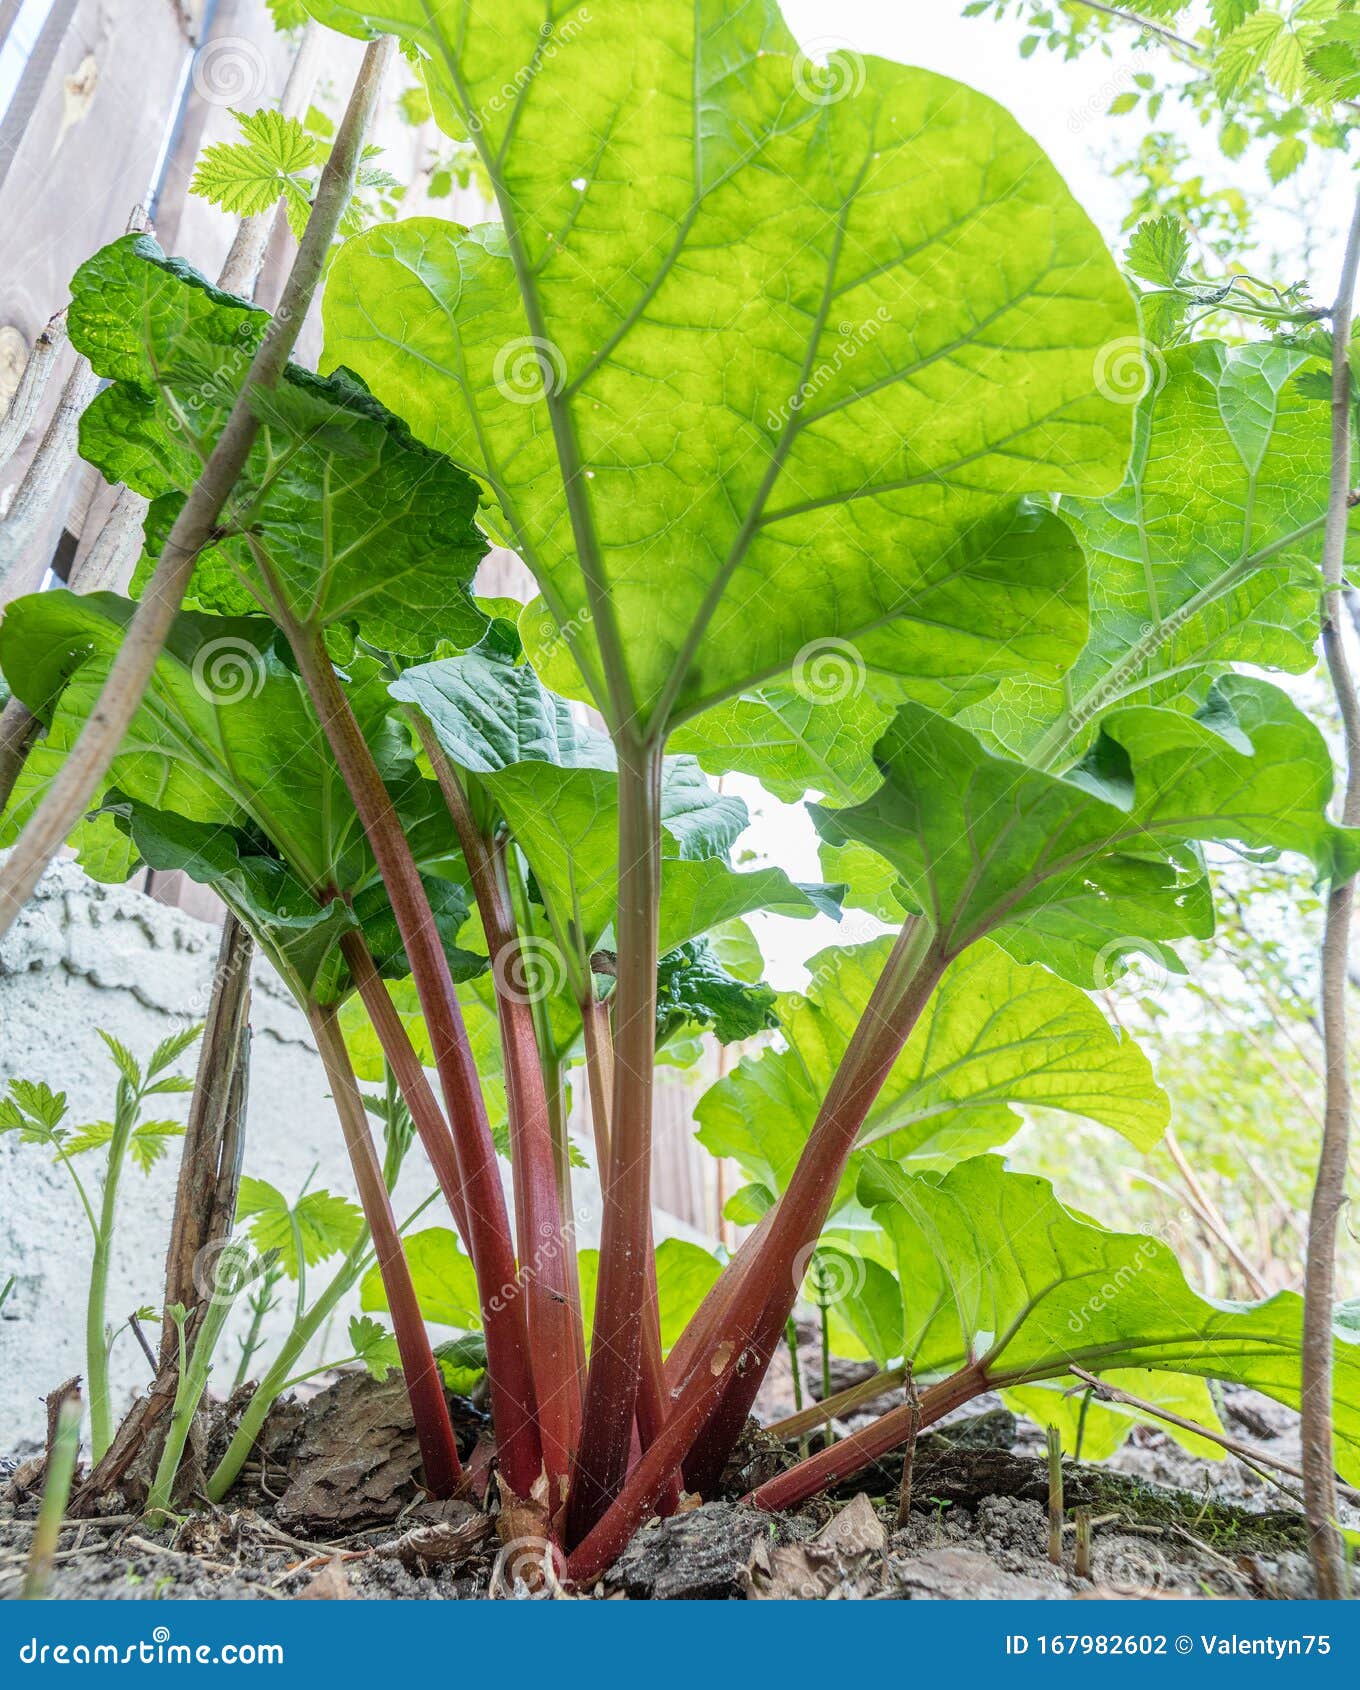 rhubarb plant in the garden. close up